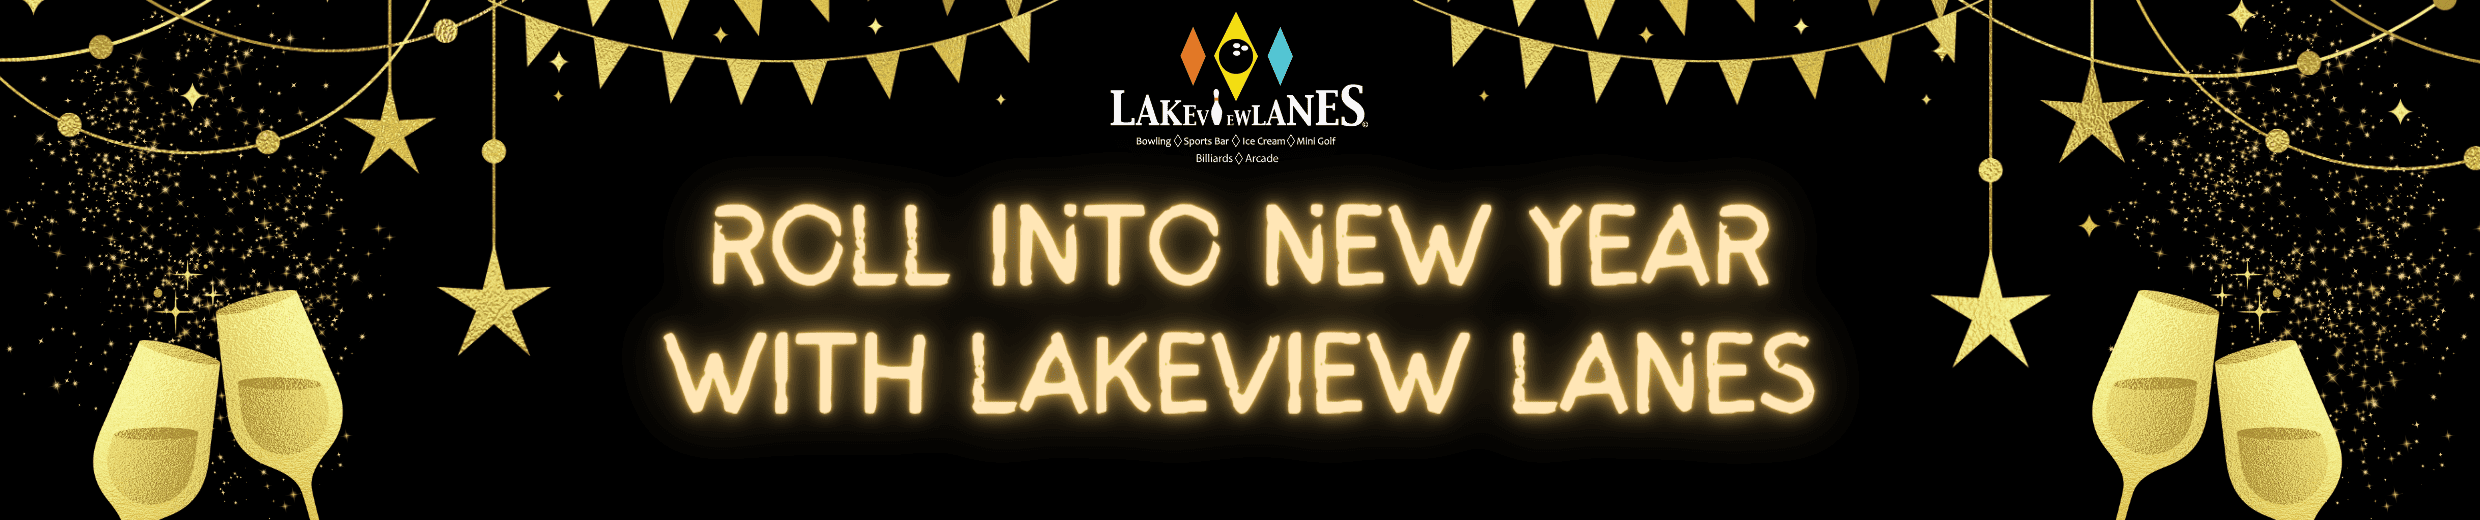 NYE with lakeview lanes